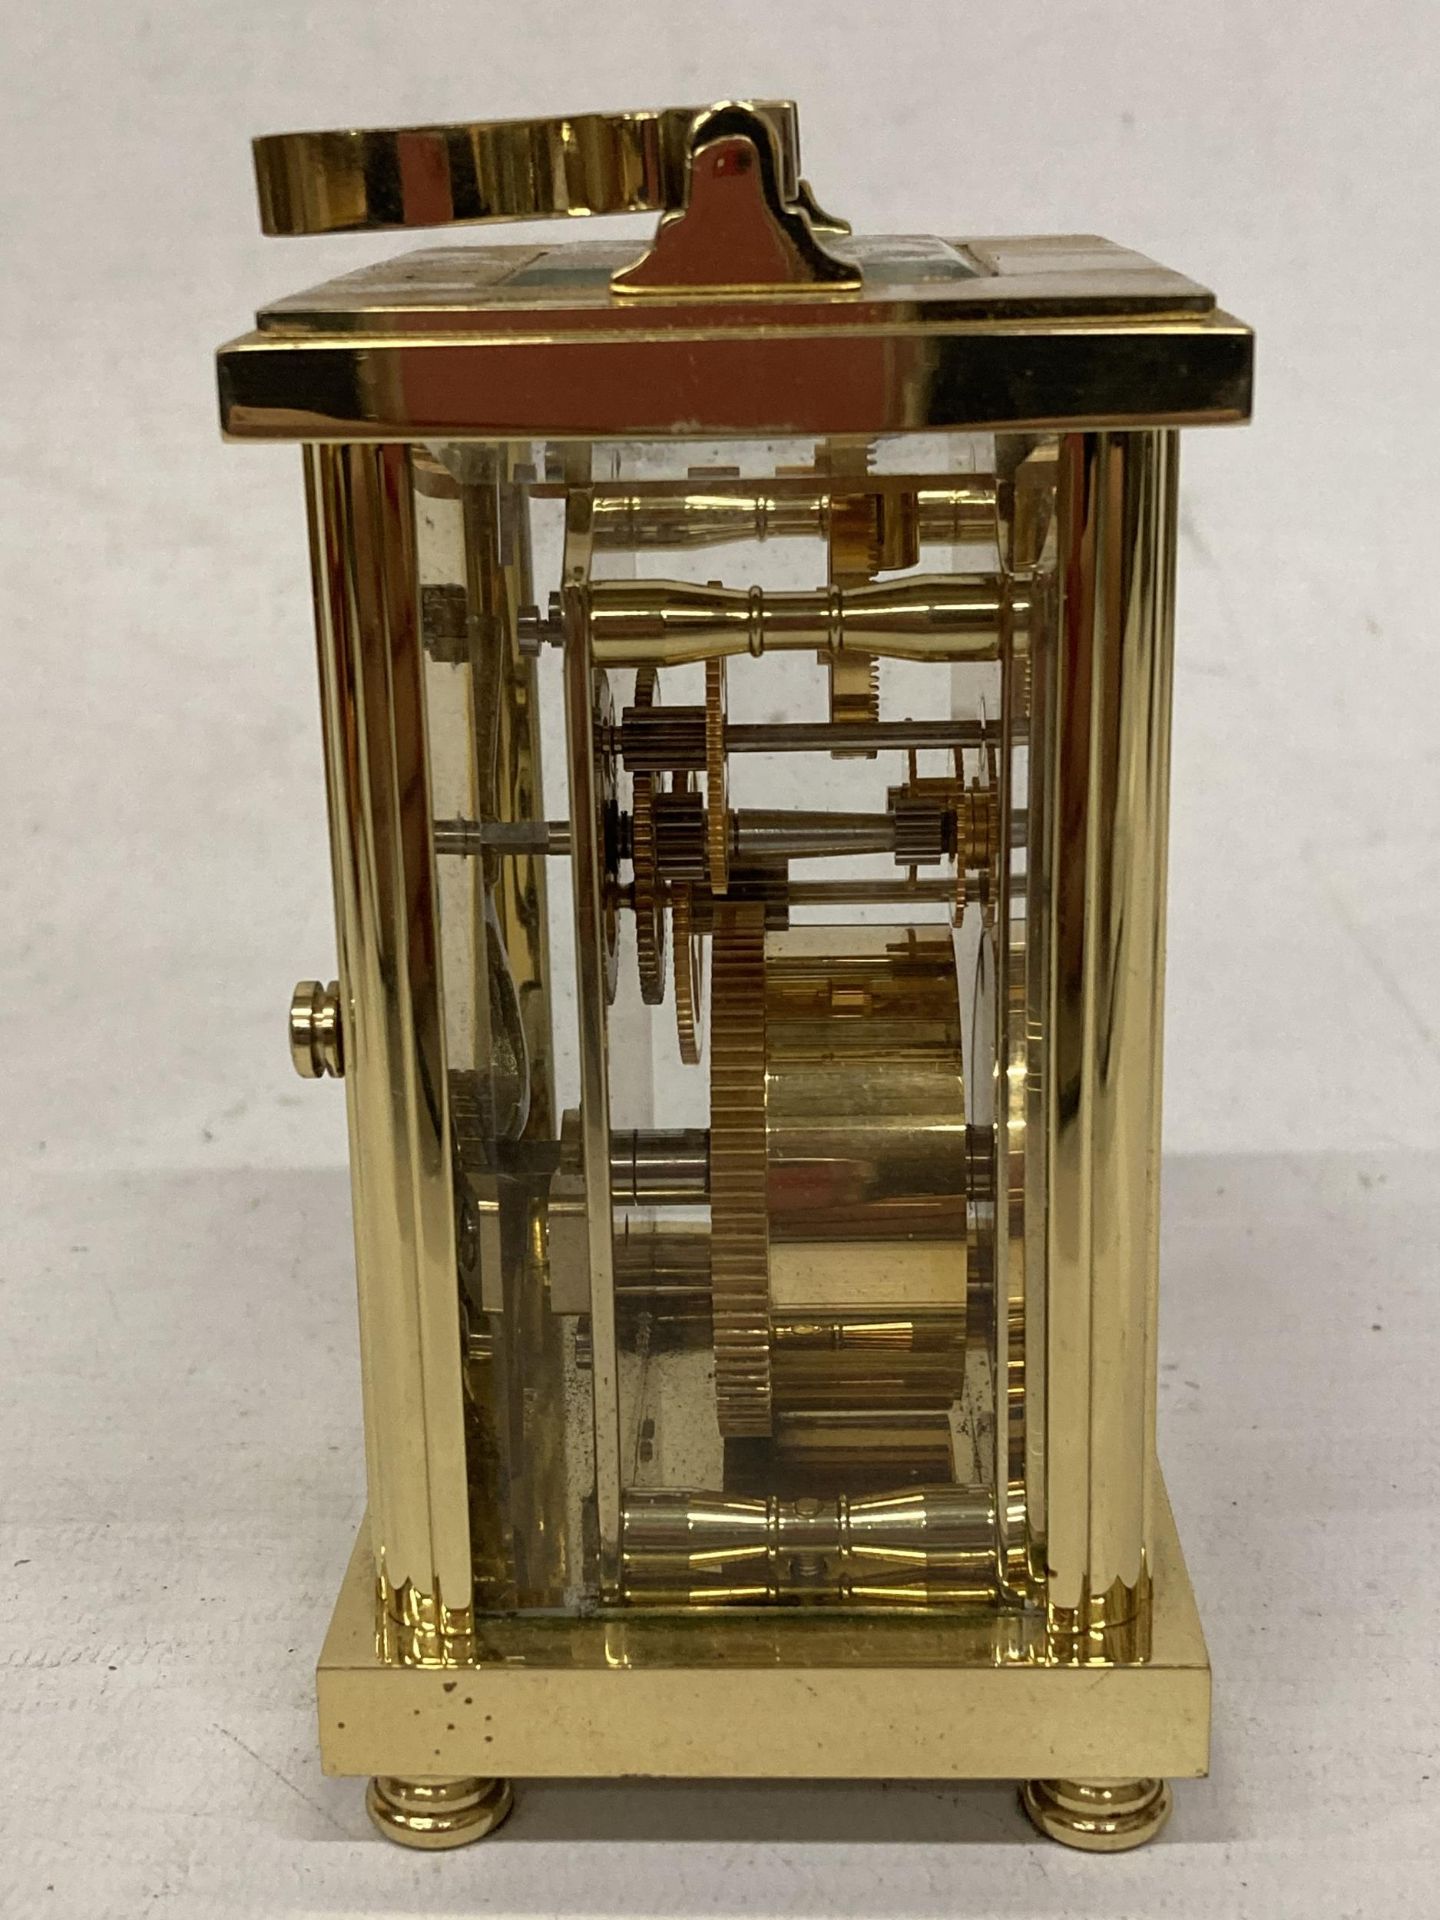 A WATCHES OF SWITZERLAND BRASS CARRIAGE CLOCK - Image 2 of 4